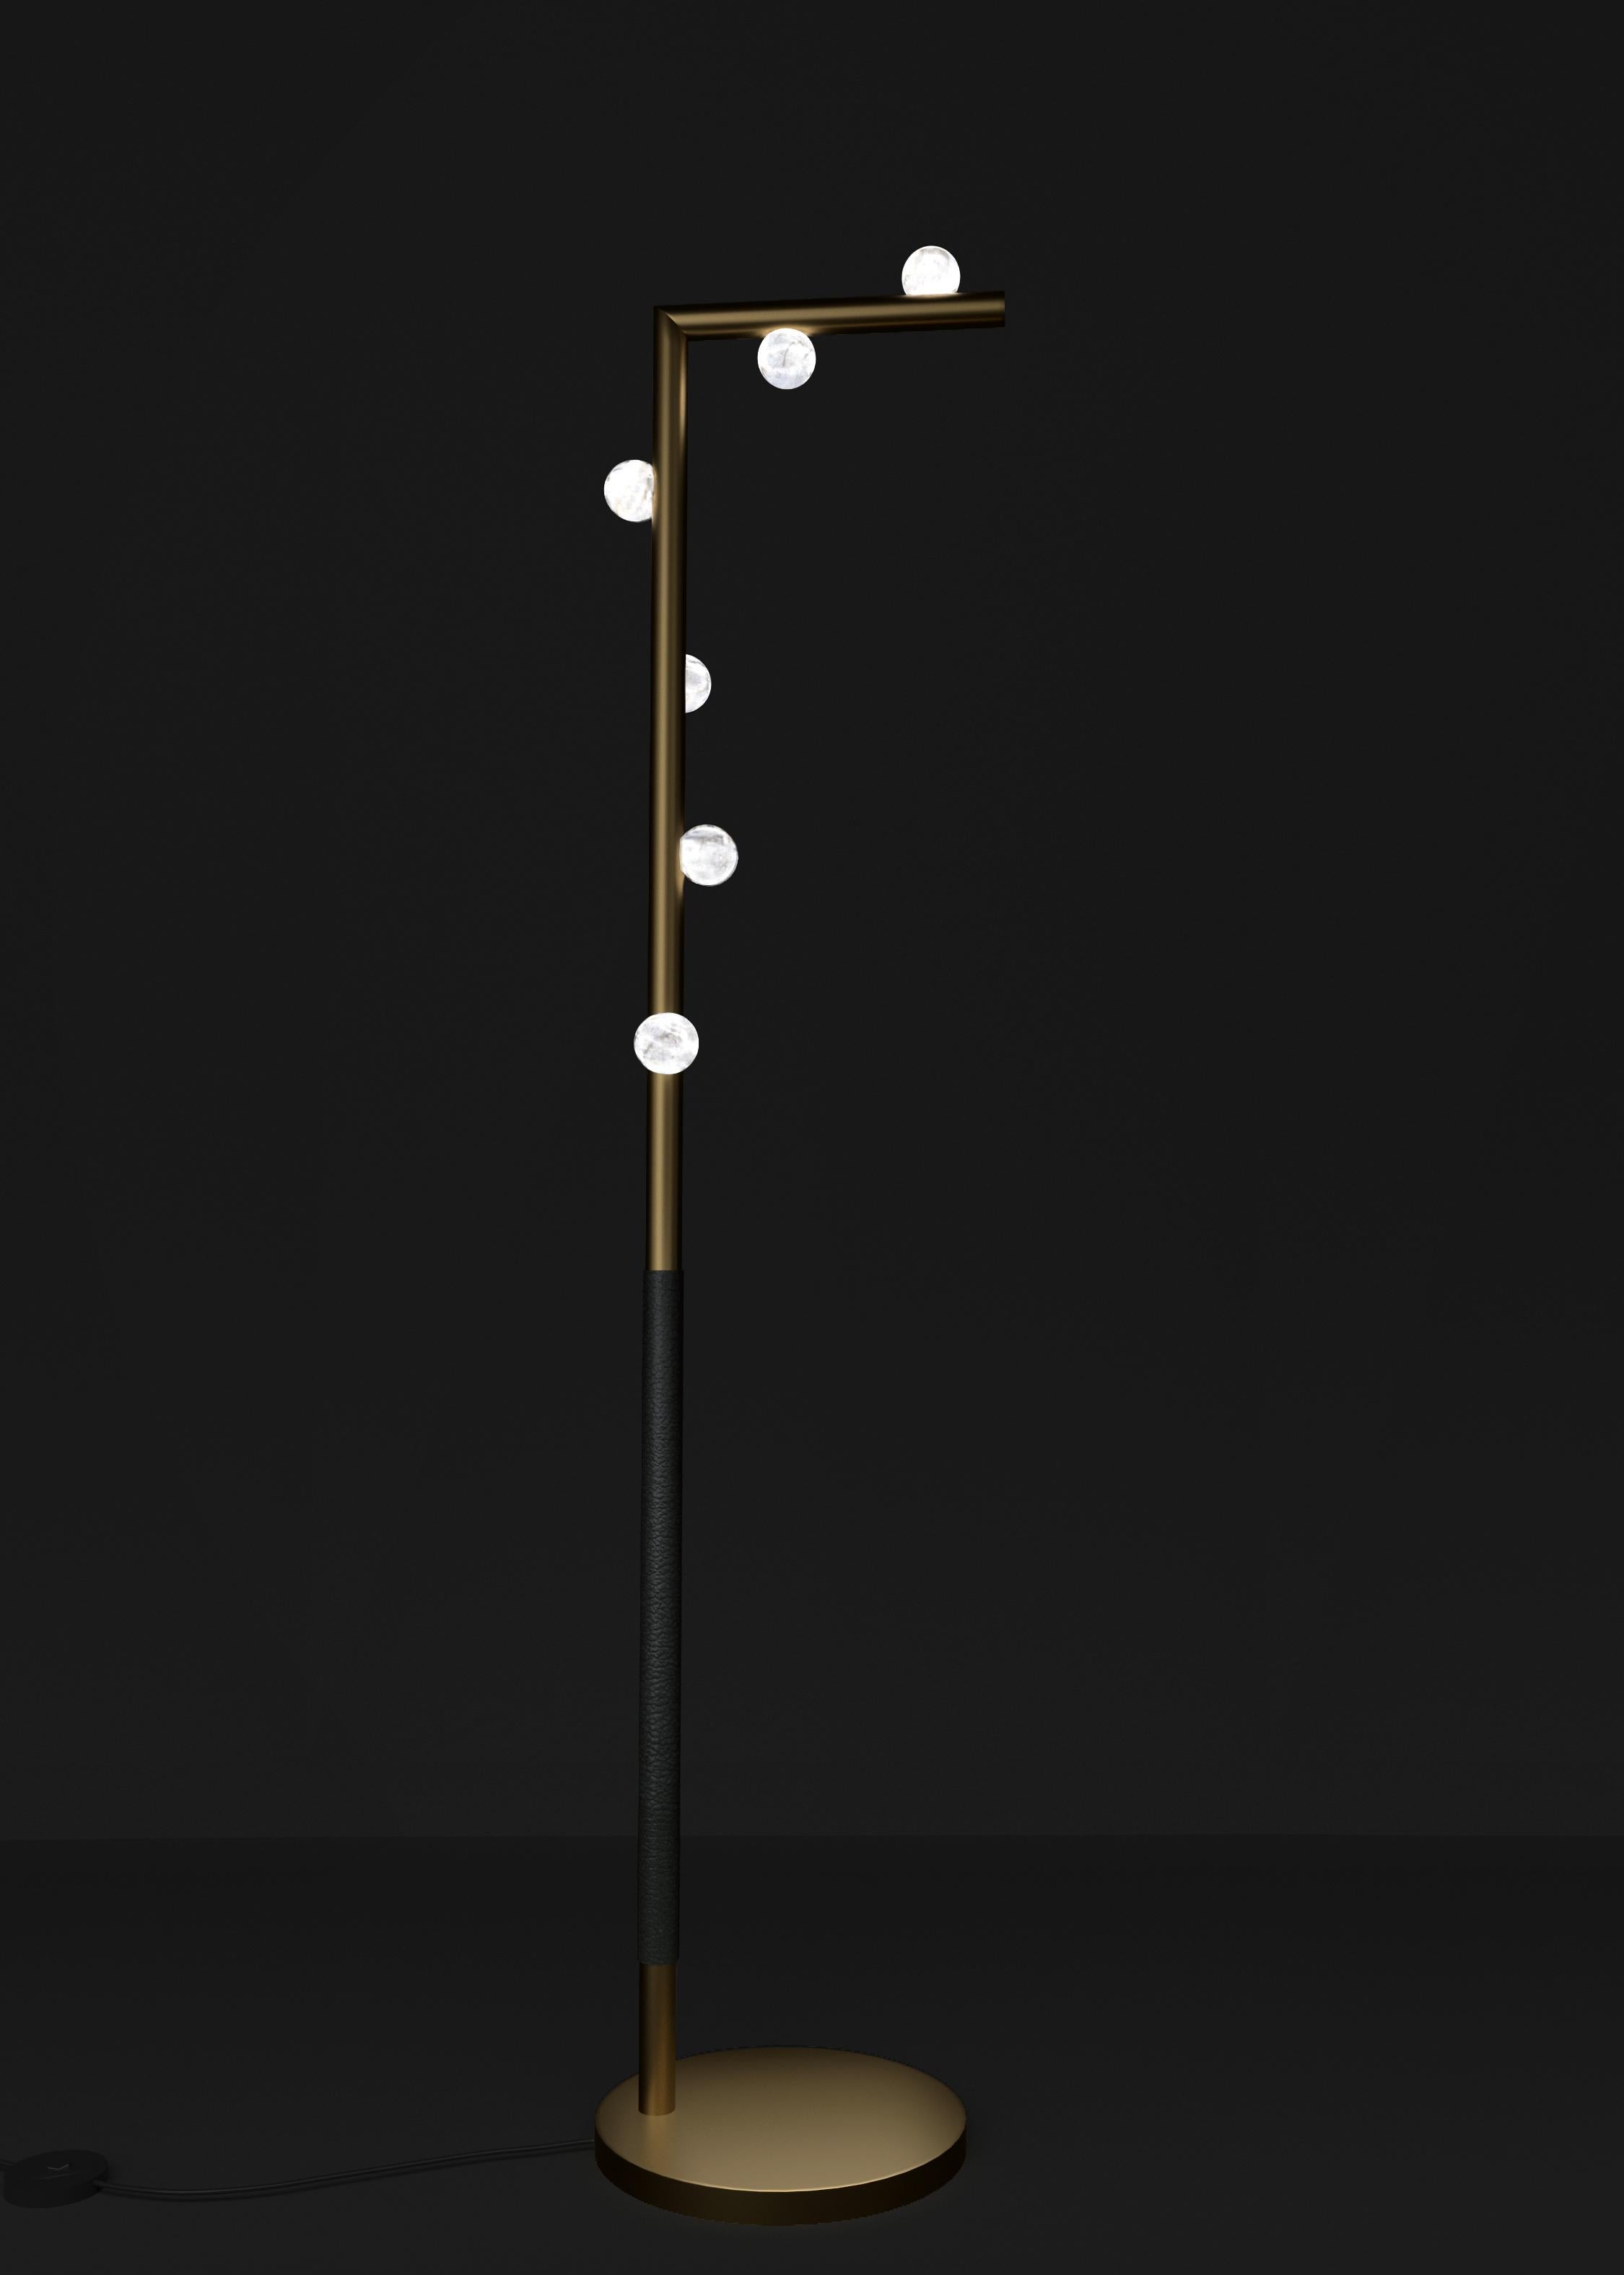 Demetra Bronze Floor Lamp by Alabastro Italiano
Dimensions: D 30 x W 37 x H 158 cm.
Materials: White alabaster, bronze and leather.

Available in different finishes: Shiny Silver, Bronze, Brushed Brass, Ruggine of Florence, Brushed Burnished, Shiny